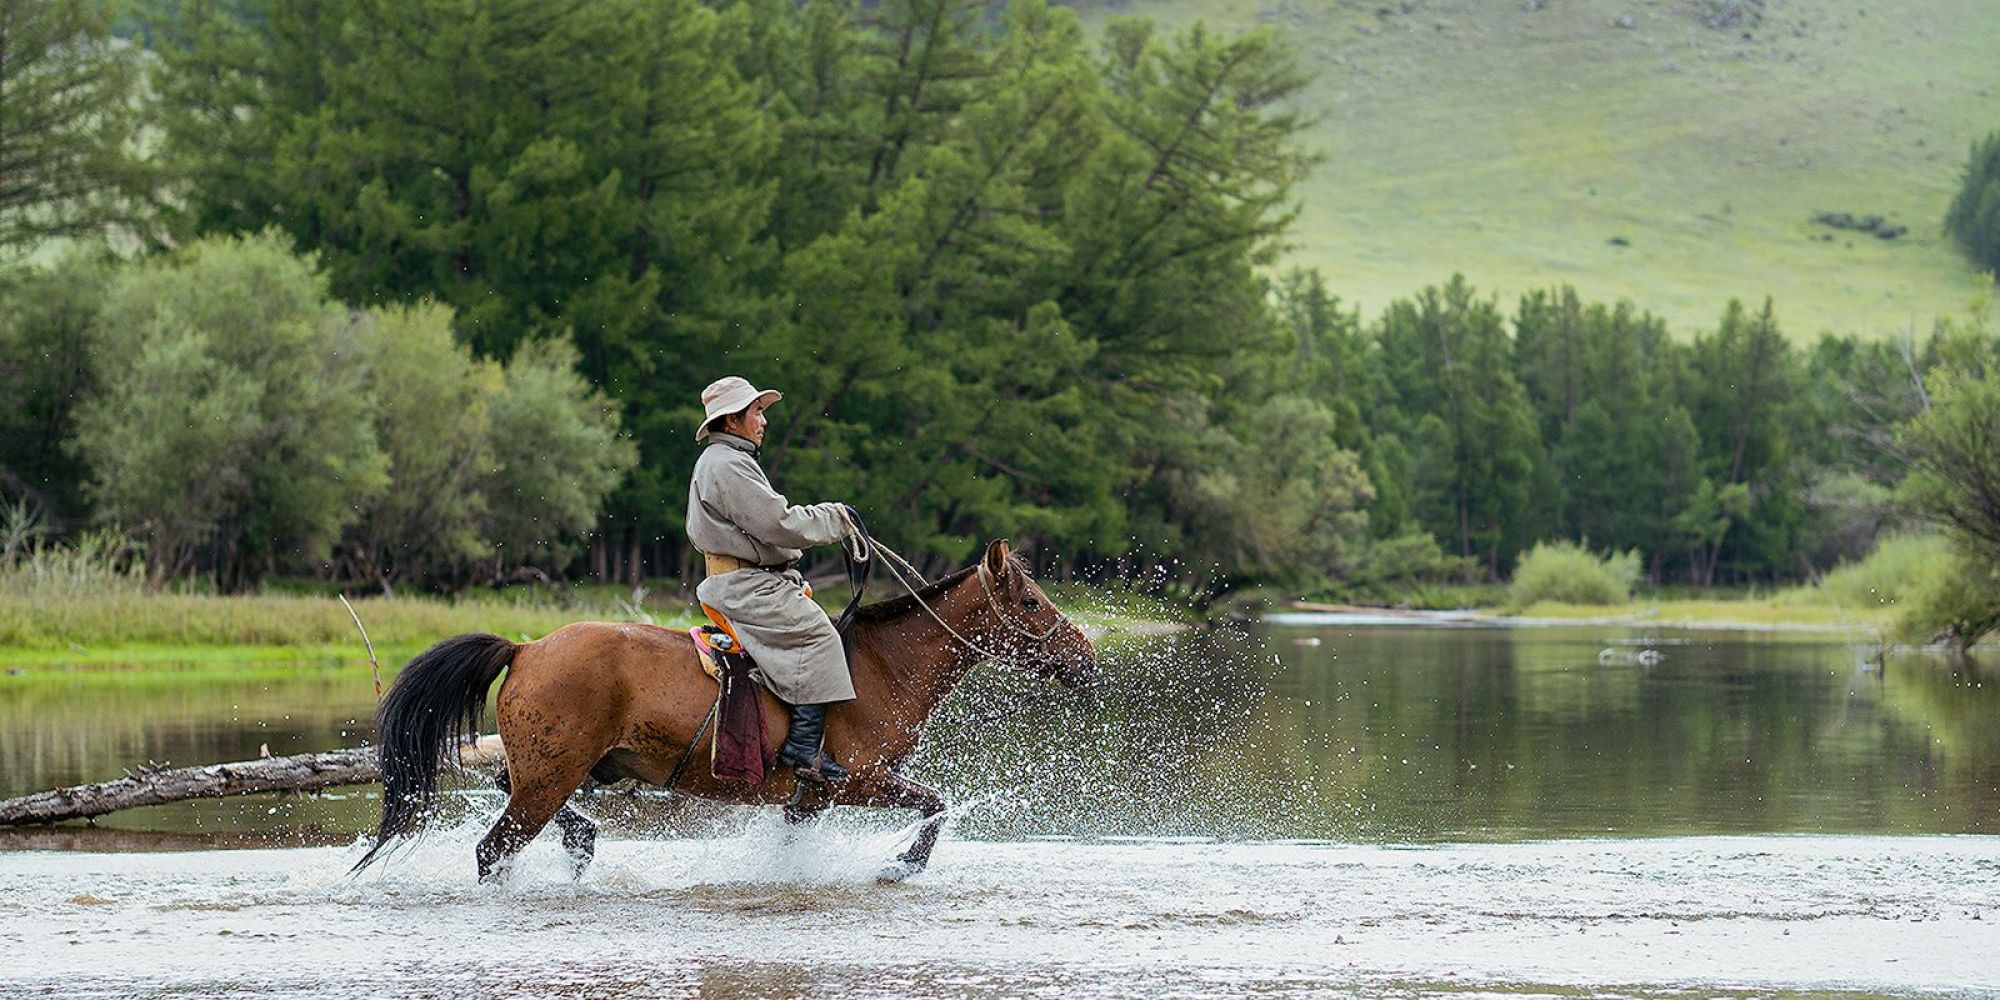 EPIC HORSE RIDING ADVENTURE IN THE FOUR DIFFERENT LANDSCAPES